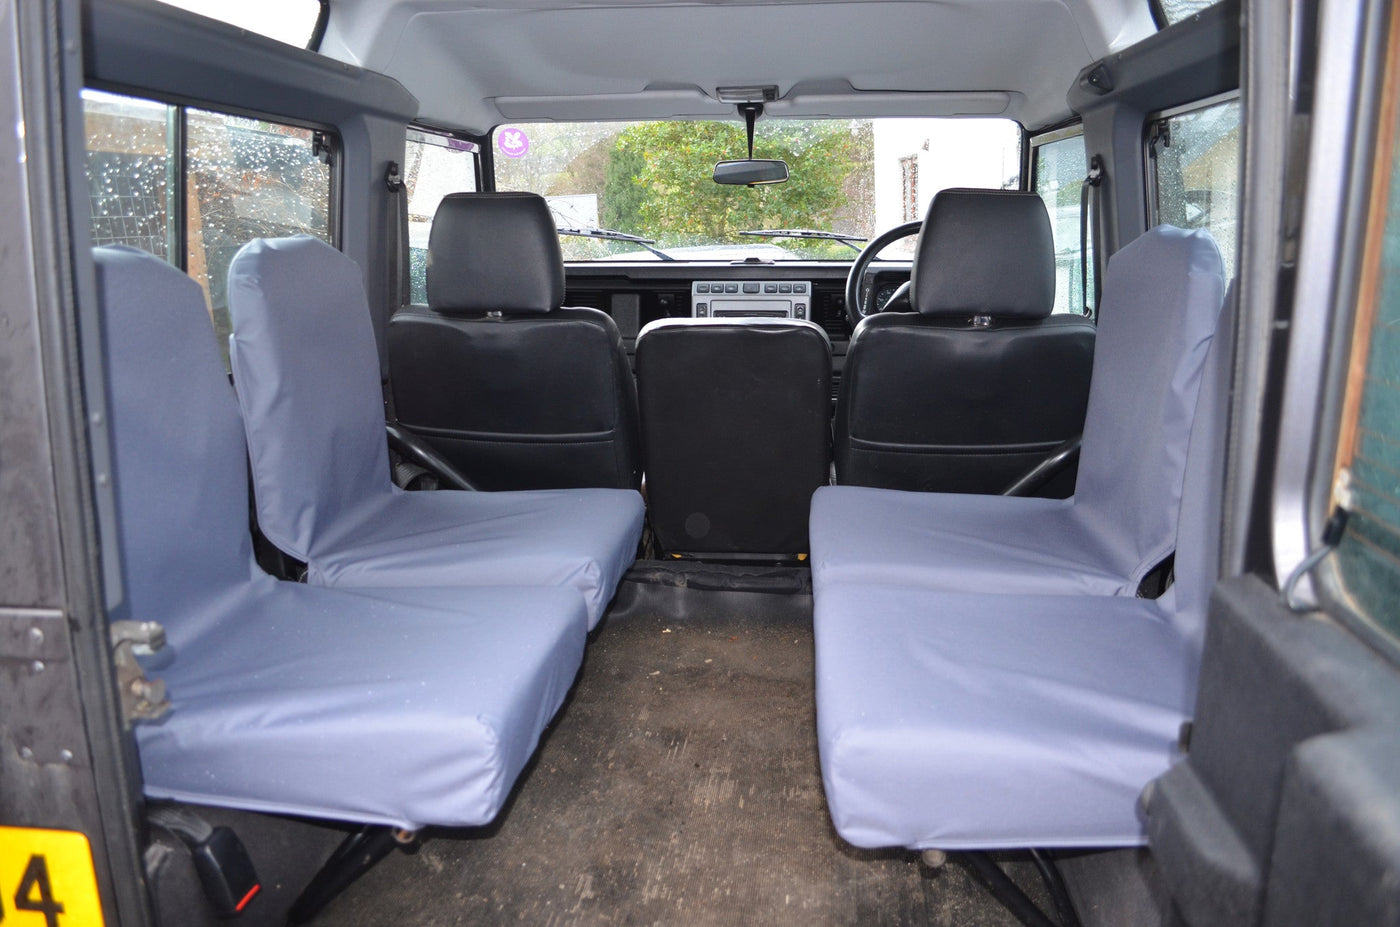 Land Rover Defender 1983 - 2007 Rear Seat Covers Set of 4 Dicky Seats / Grey Scutes Ltd